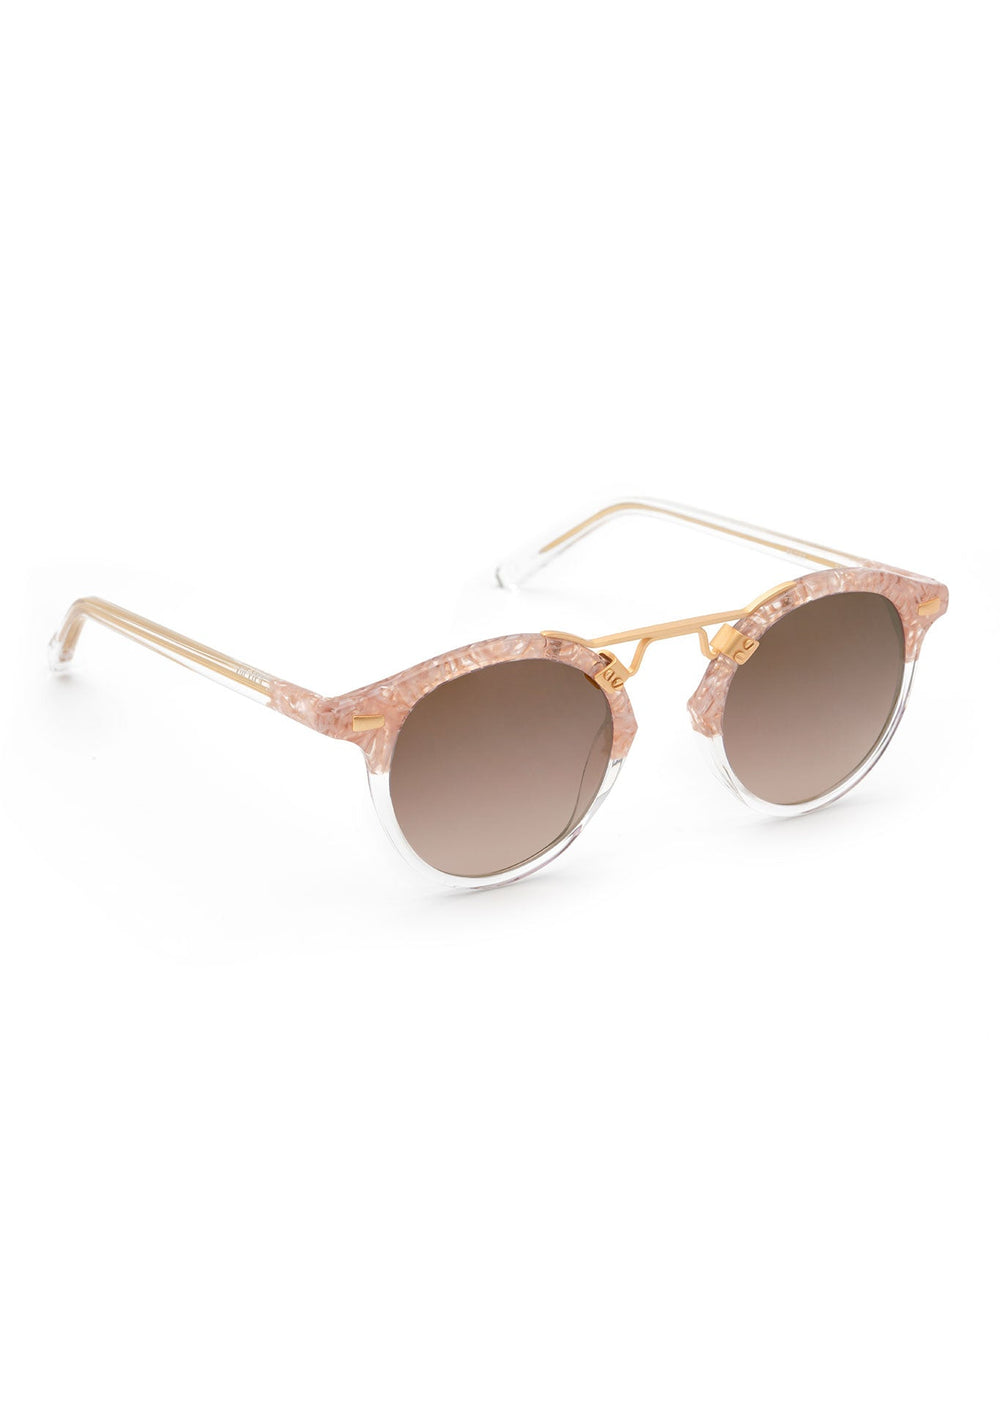 ST. LOUIS MIRRORED | Camellia to Crystal 24K Handcrafted, luxury, pink Acetate KREWE Sunglasses